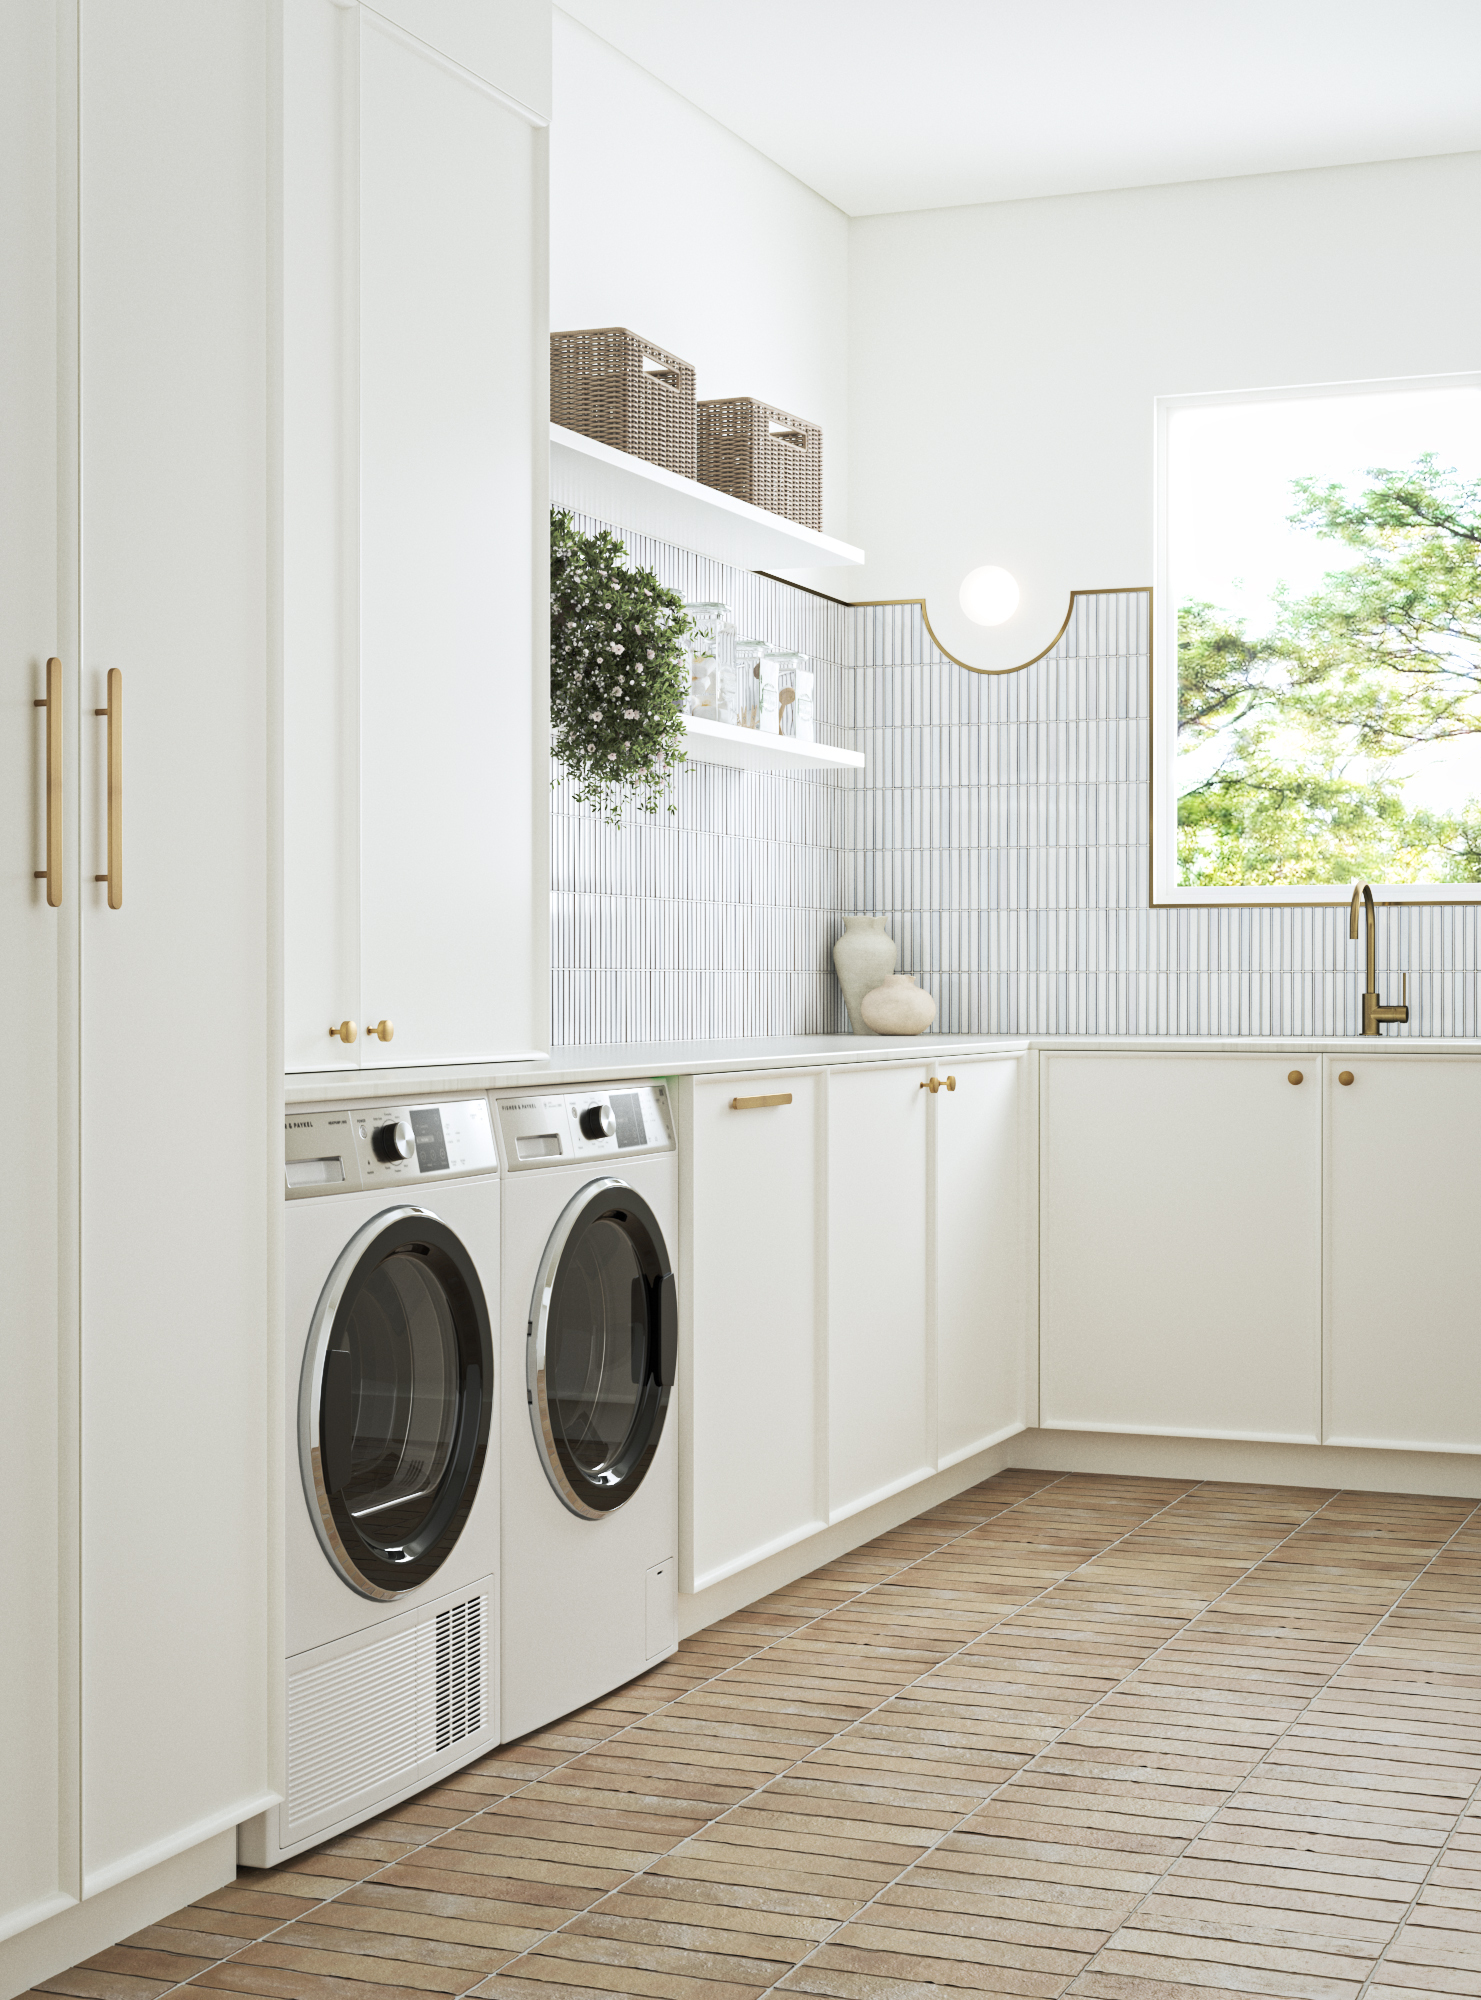 Casual Laundry room ideas. Crisp & Clean Laundry. By Temple & Webster